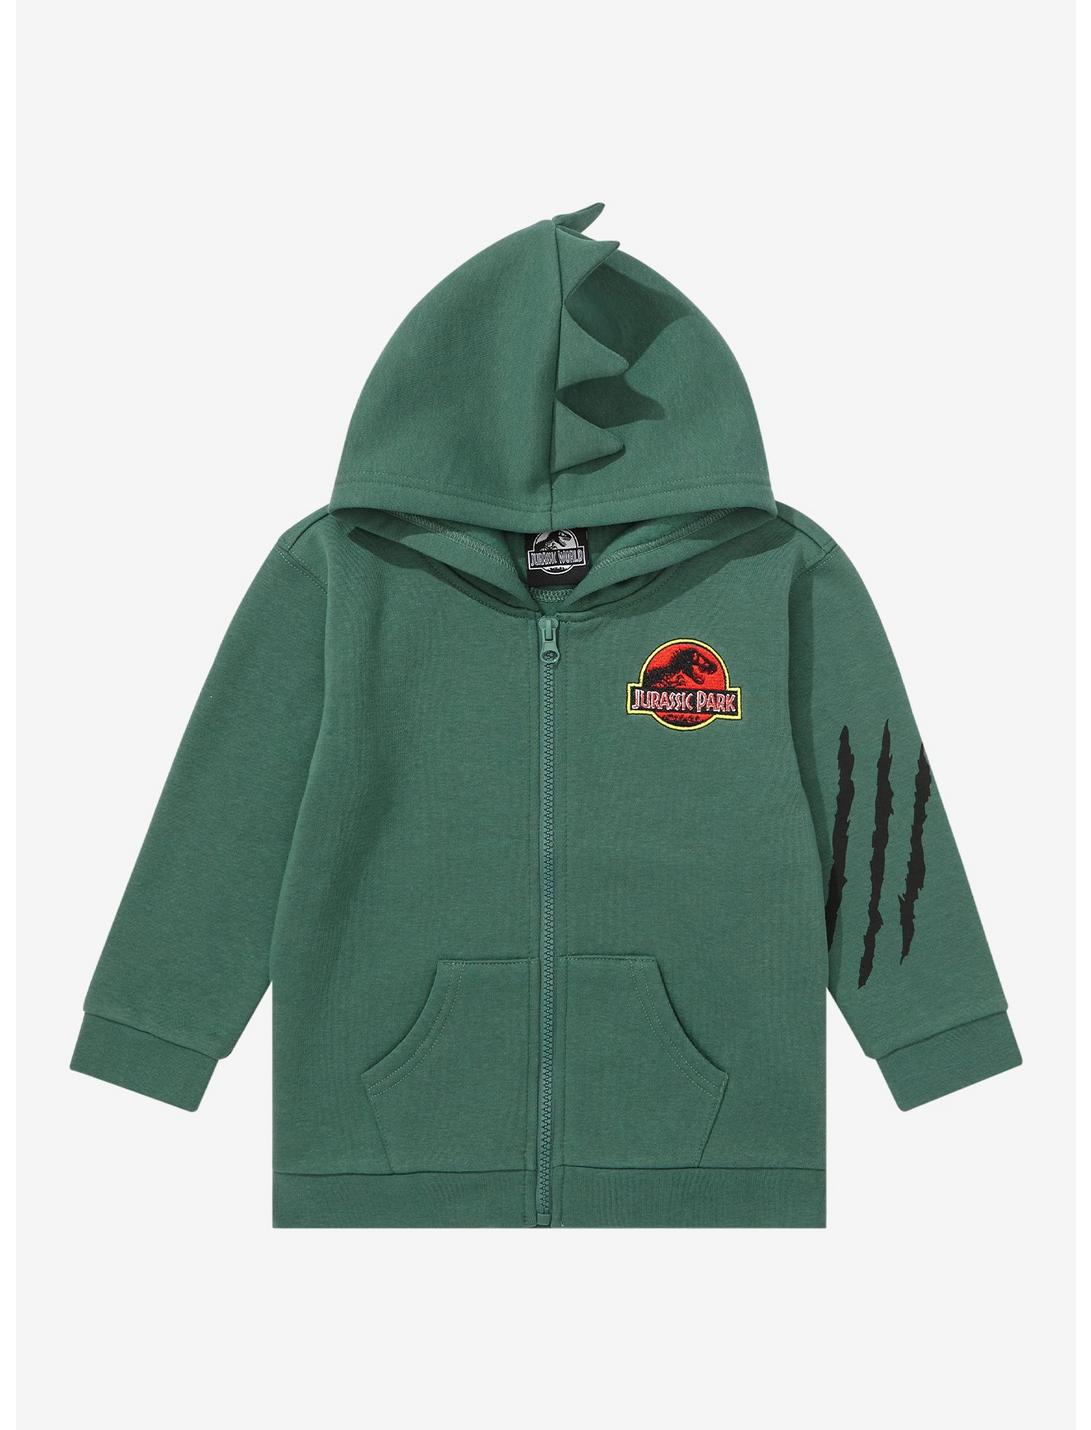 Jurassic Park T-Rex Toddler Zippered Hoodie - BoxLunch Exclusive, GREEN, hi-res